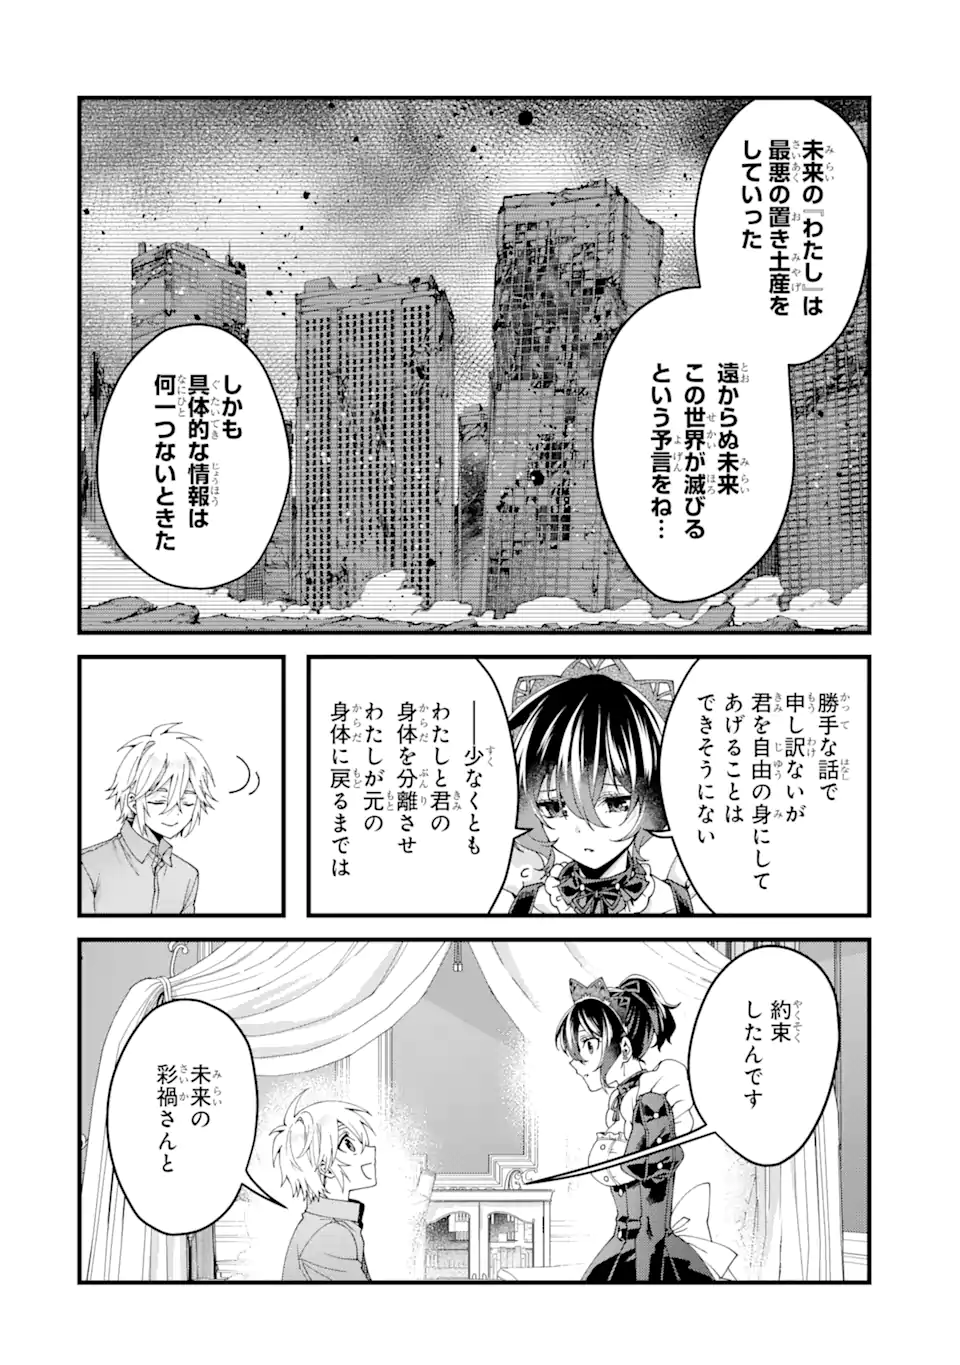 Ousama no Propose - Chapter 14.4 - Page 3